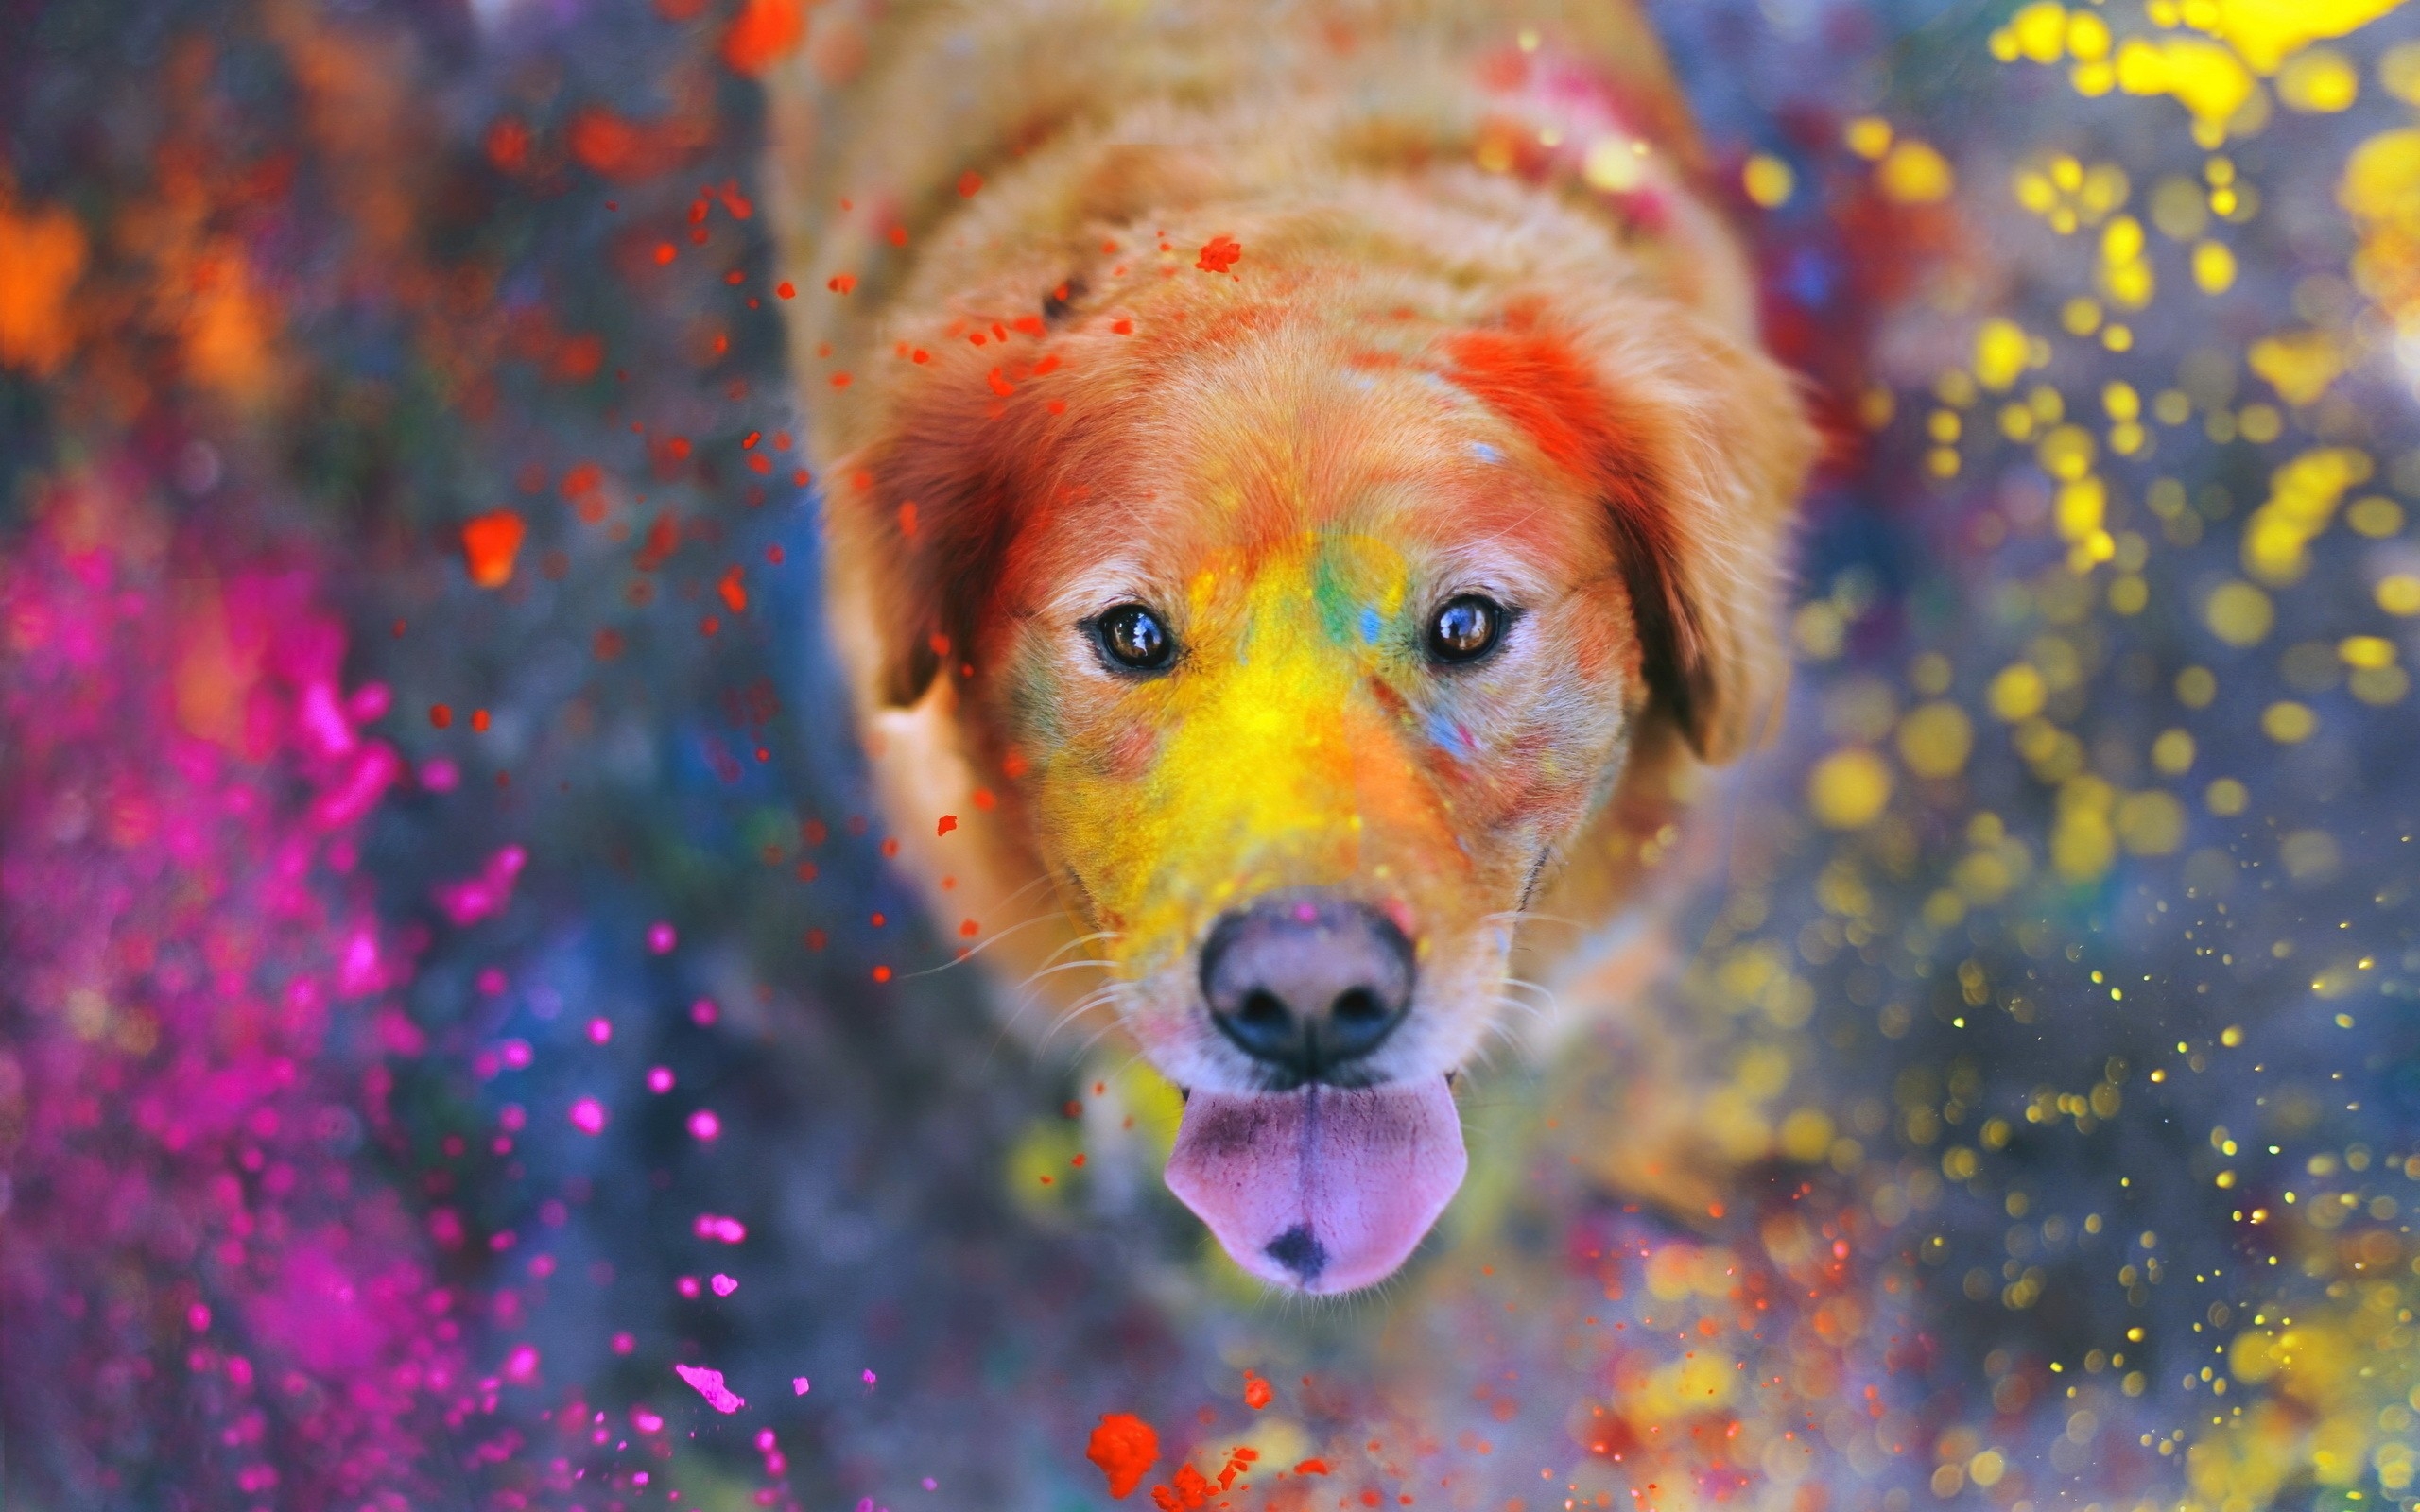 Download Wallpaper 2560x1600 Dogs, Paint, Spray, Face 2560x1600 HD ...